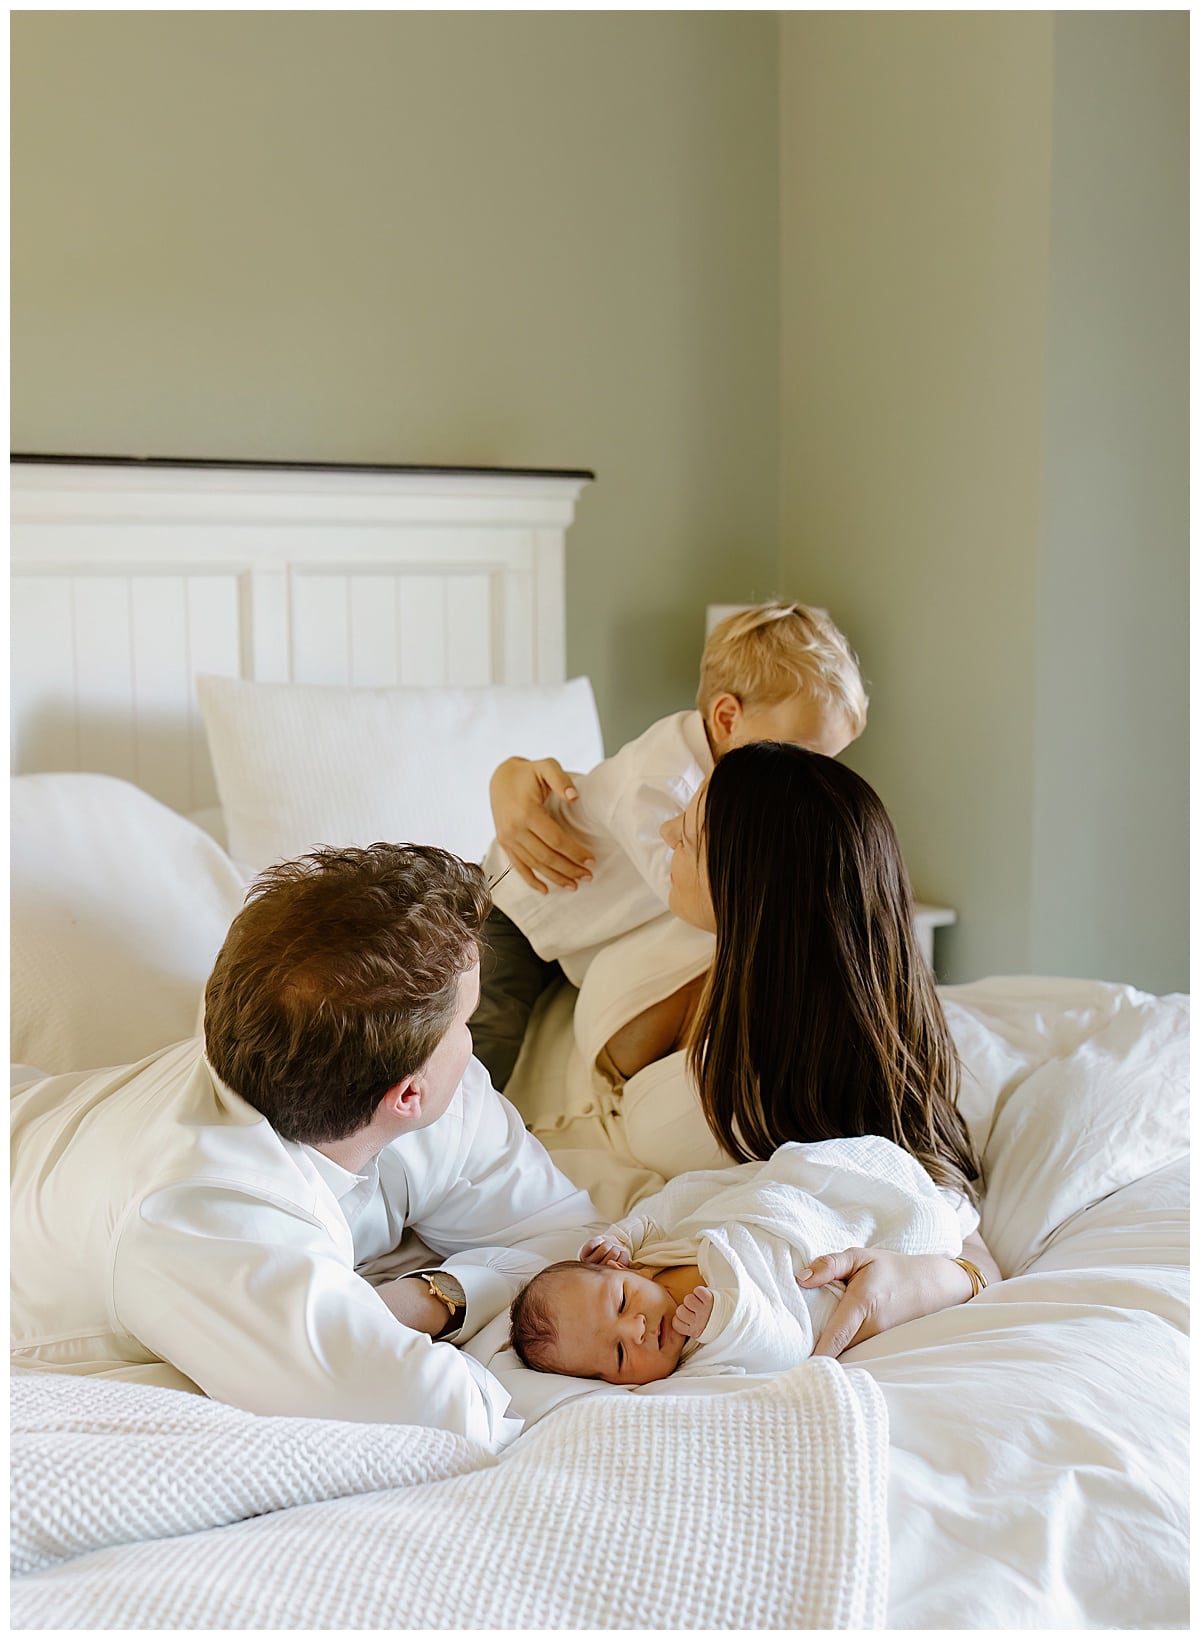 Family plays on the bed to Create Memories during their Newborn Storytelling Session